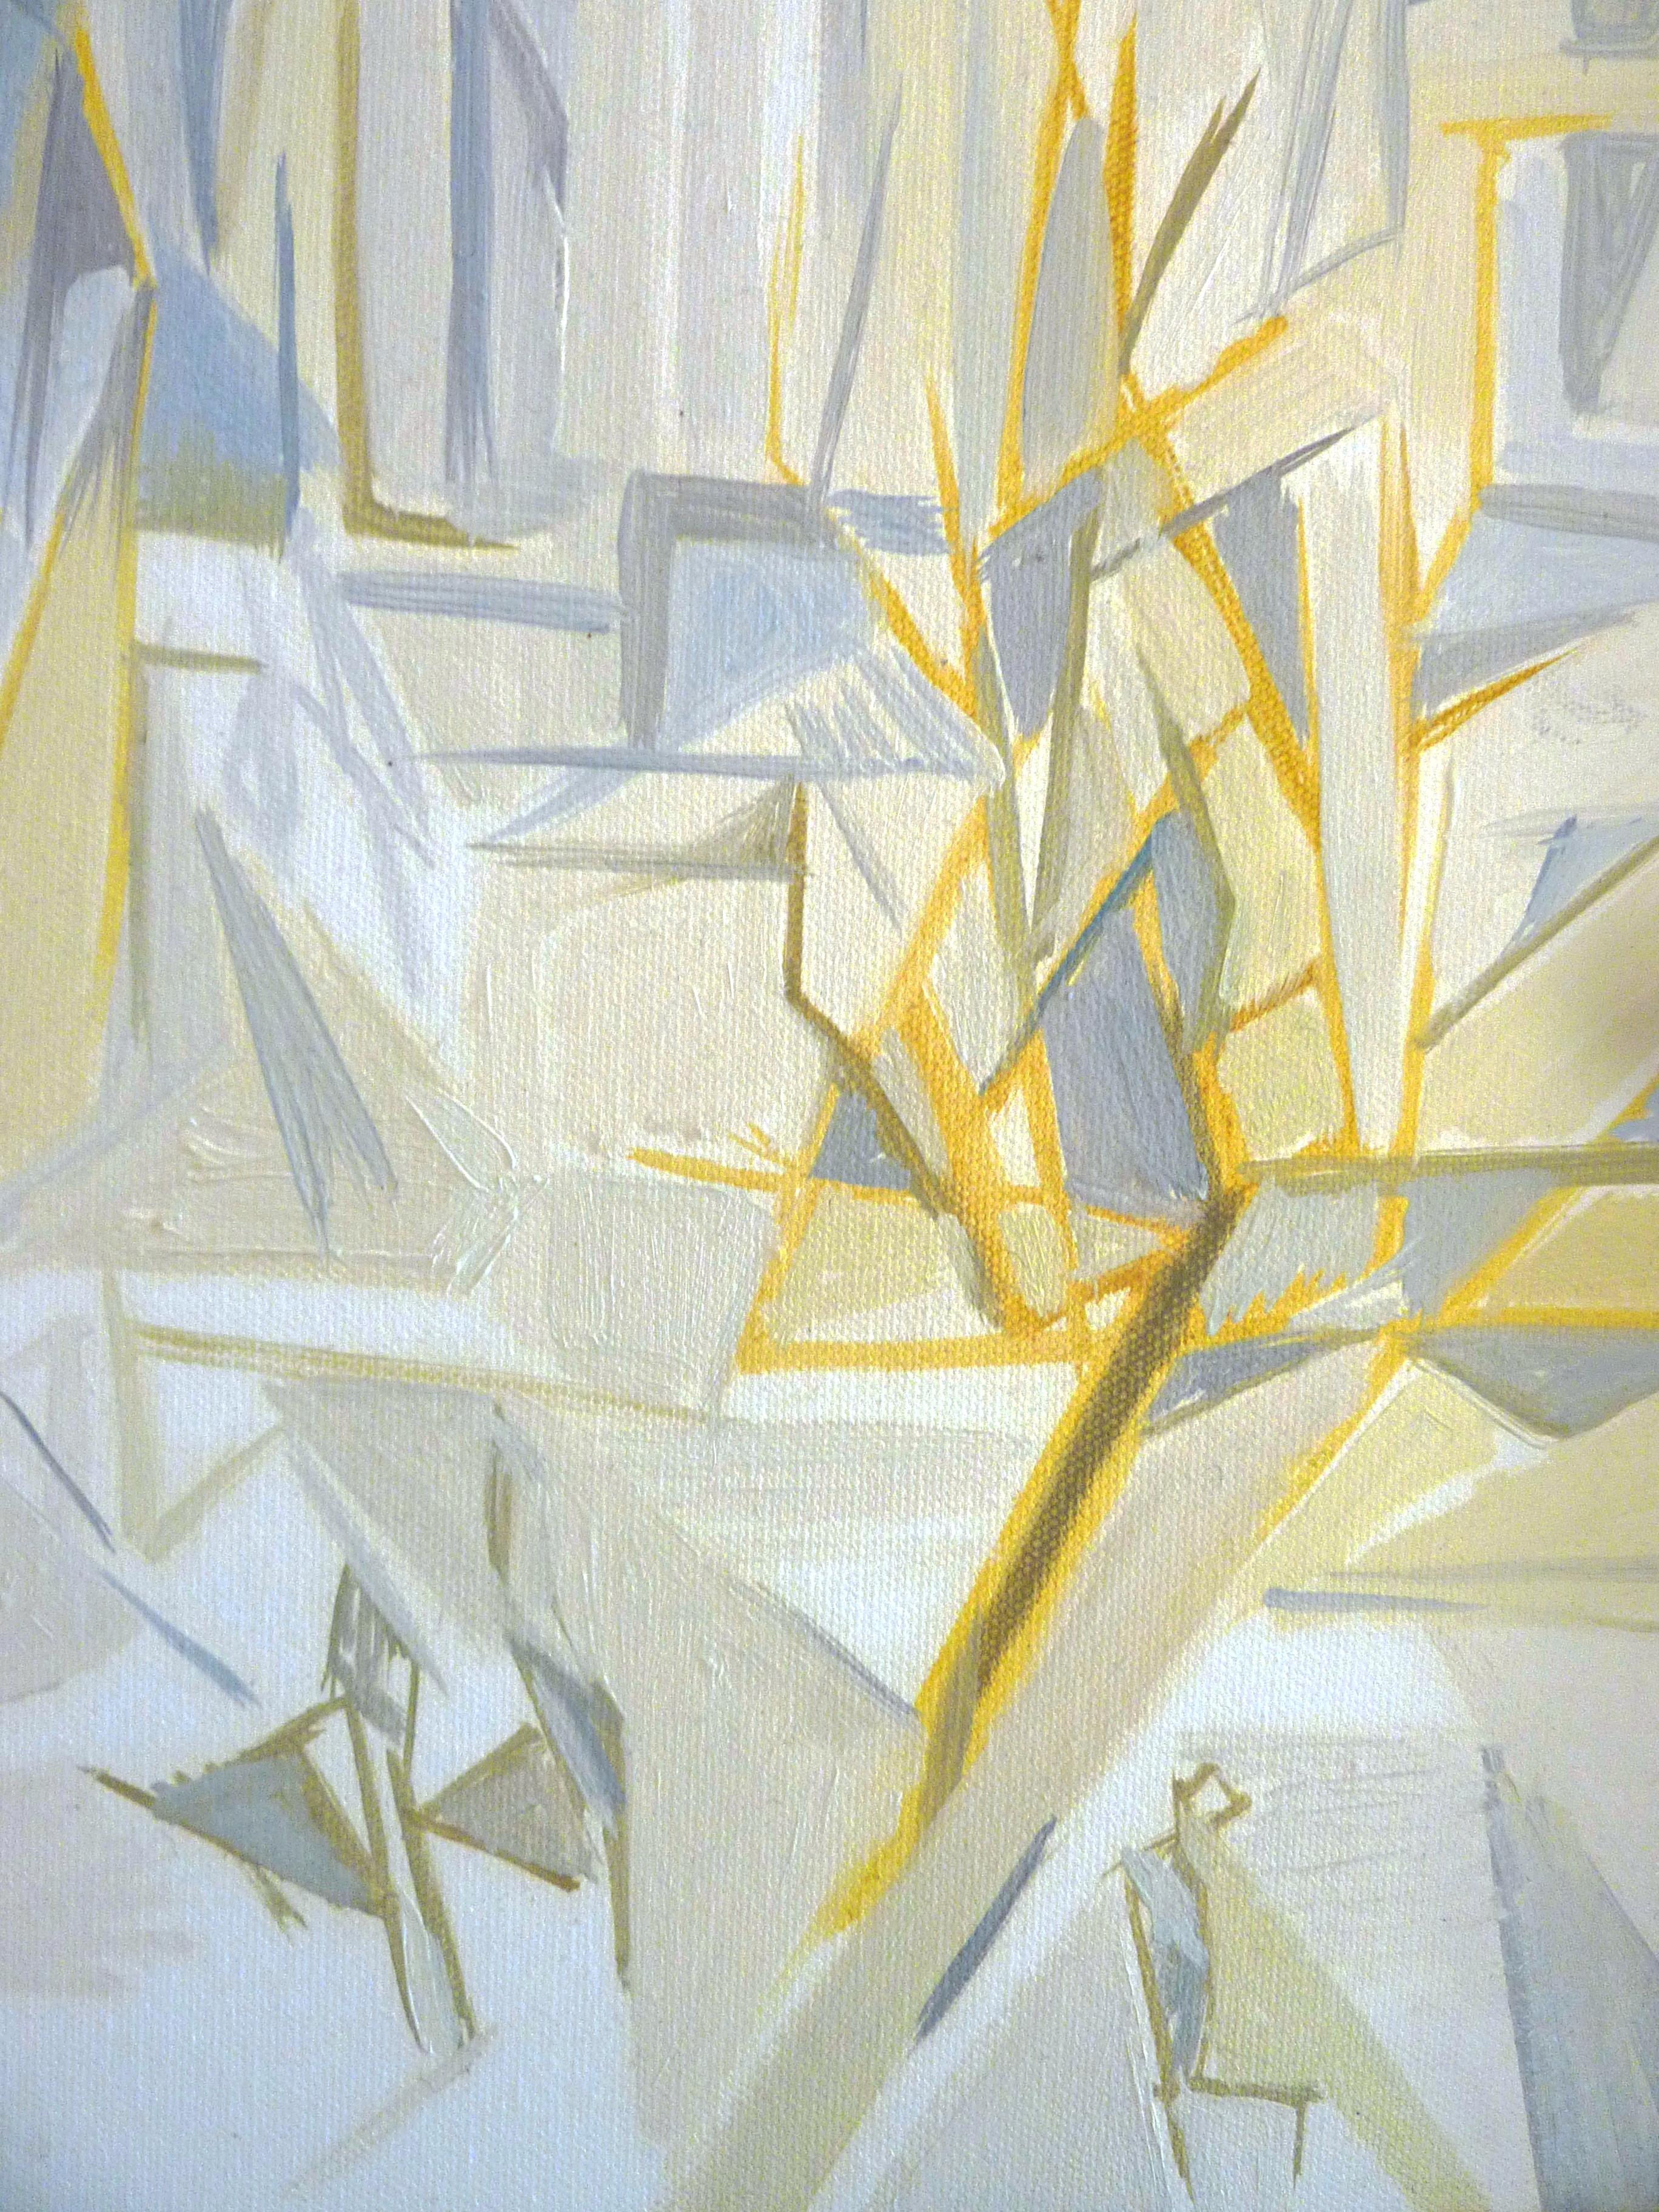 Winter Storm at the Academy Garden - 21st Century Contemporary Cubism Painting - Beige Abstract Painting by Nikol Klampert